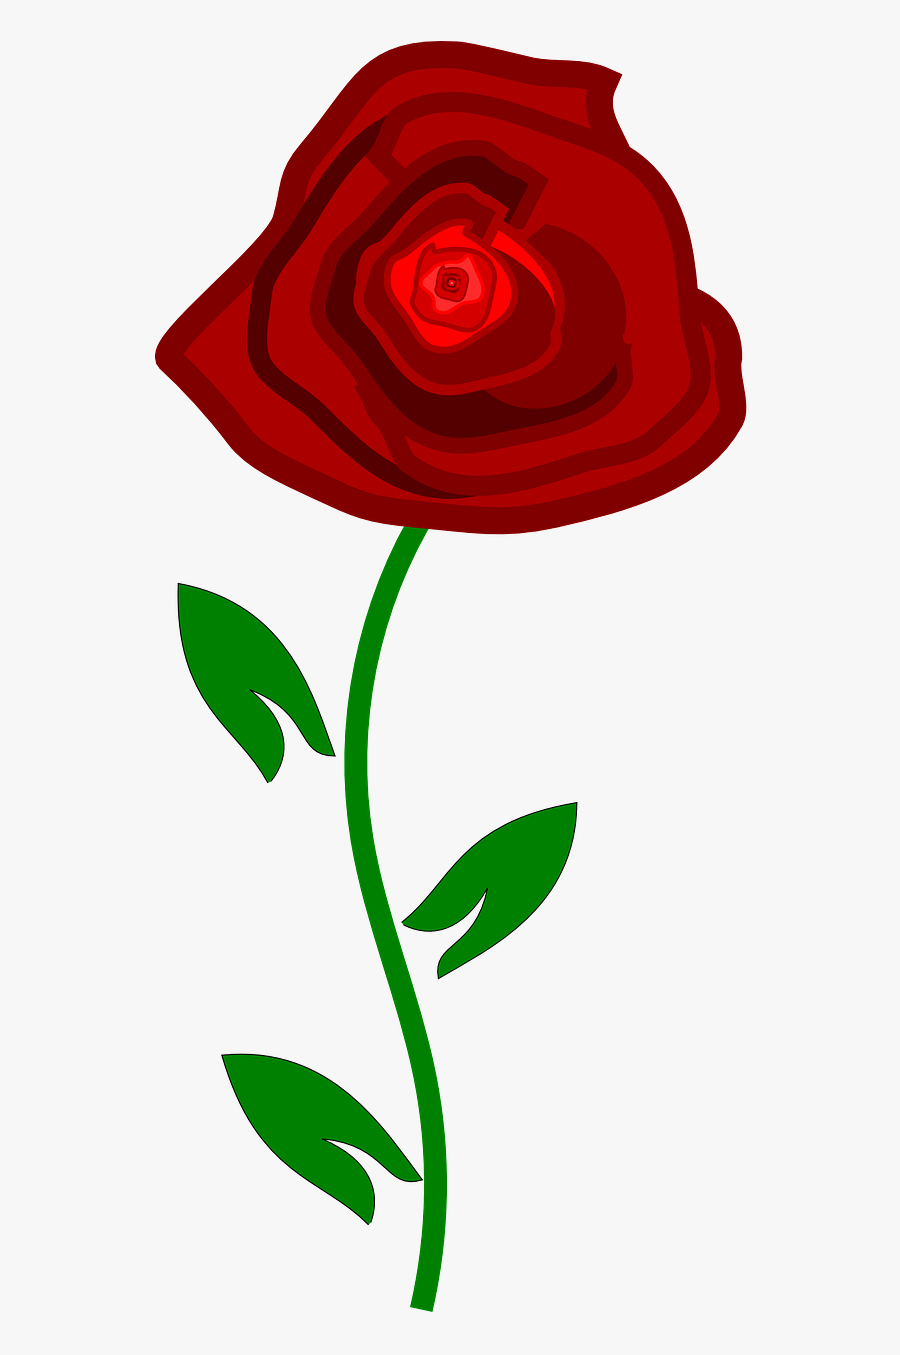 Roses Clipart Png - Animated Rose Transparent Background, Transparent Clipart